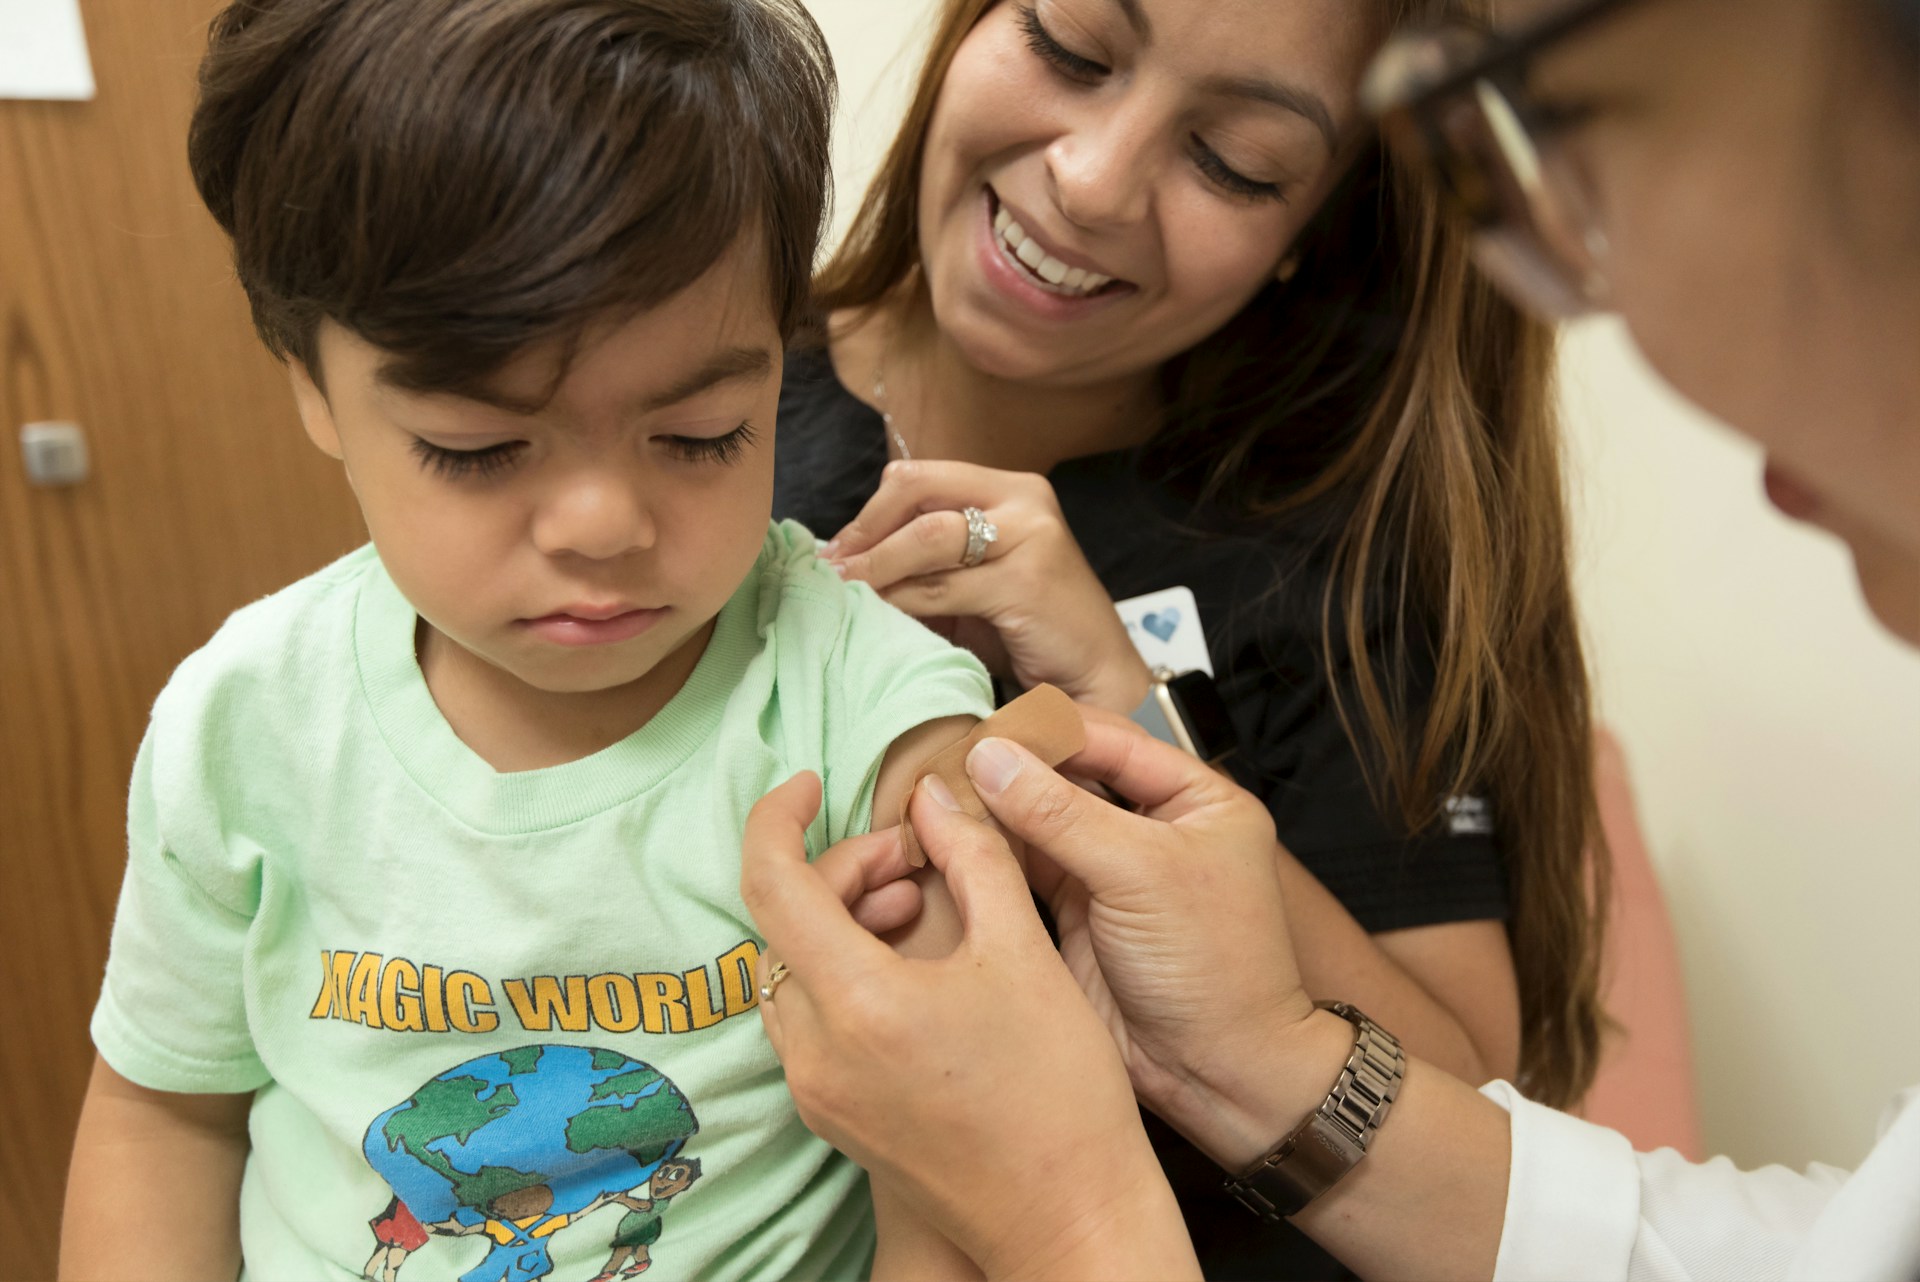 Tackling measles: nursing’s role in supporting vaccination (webinar)